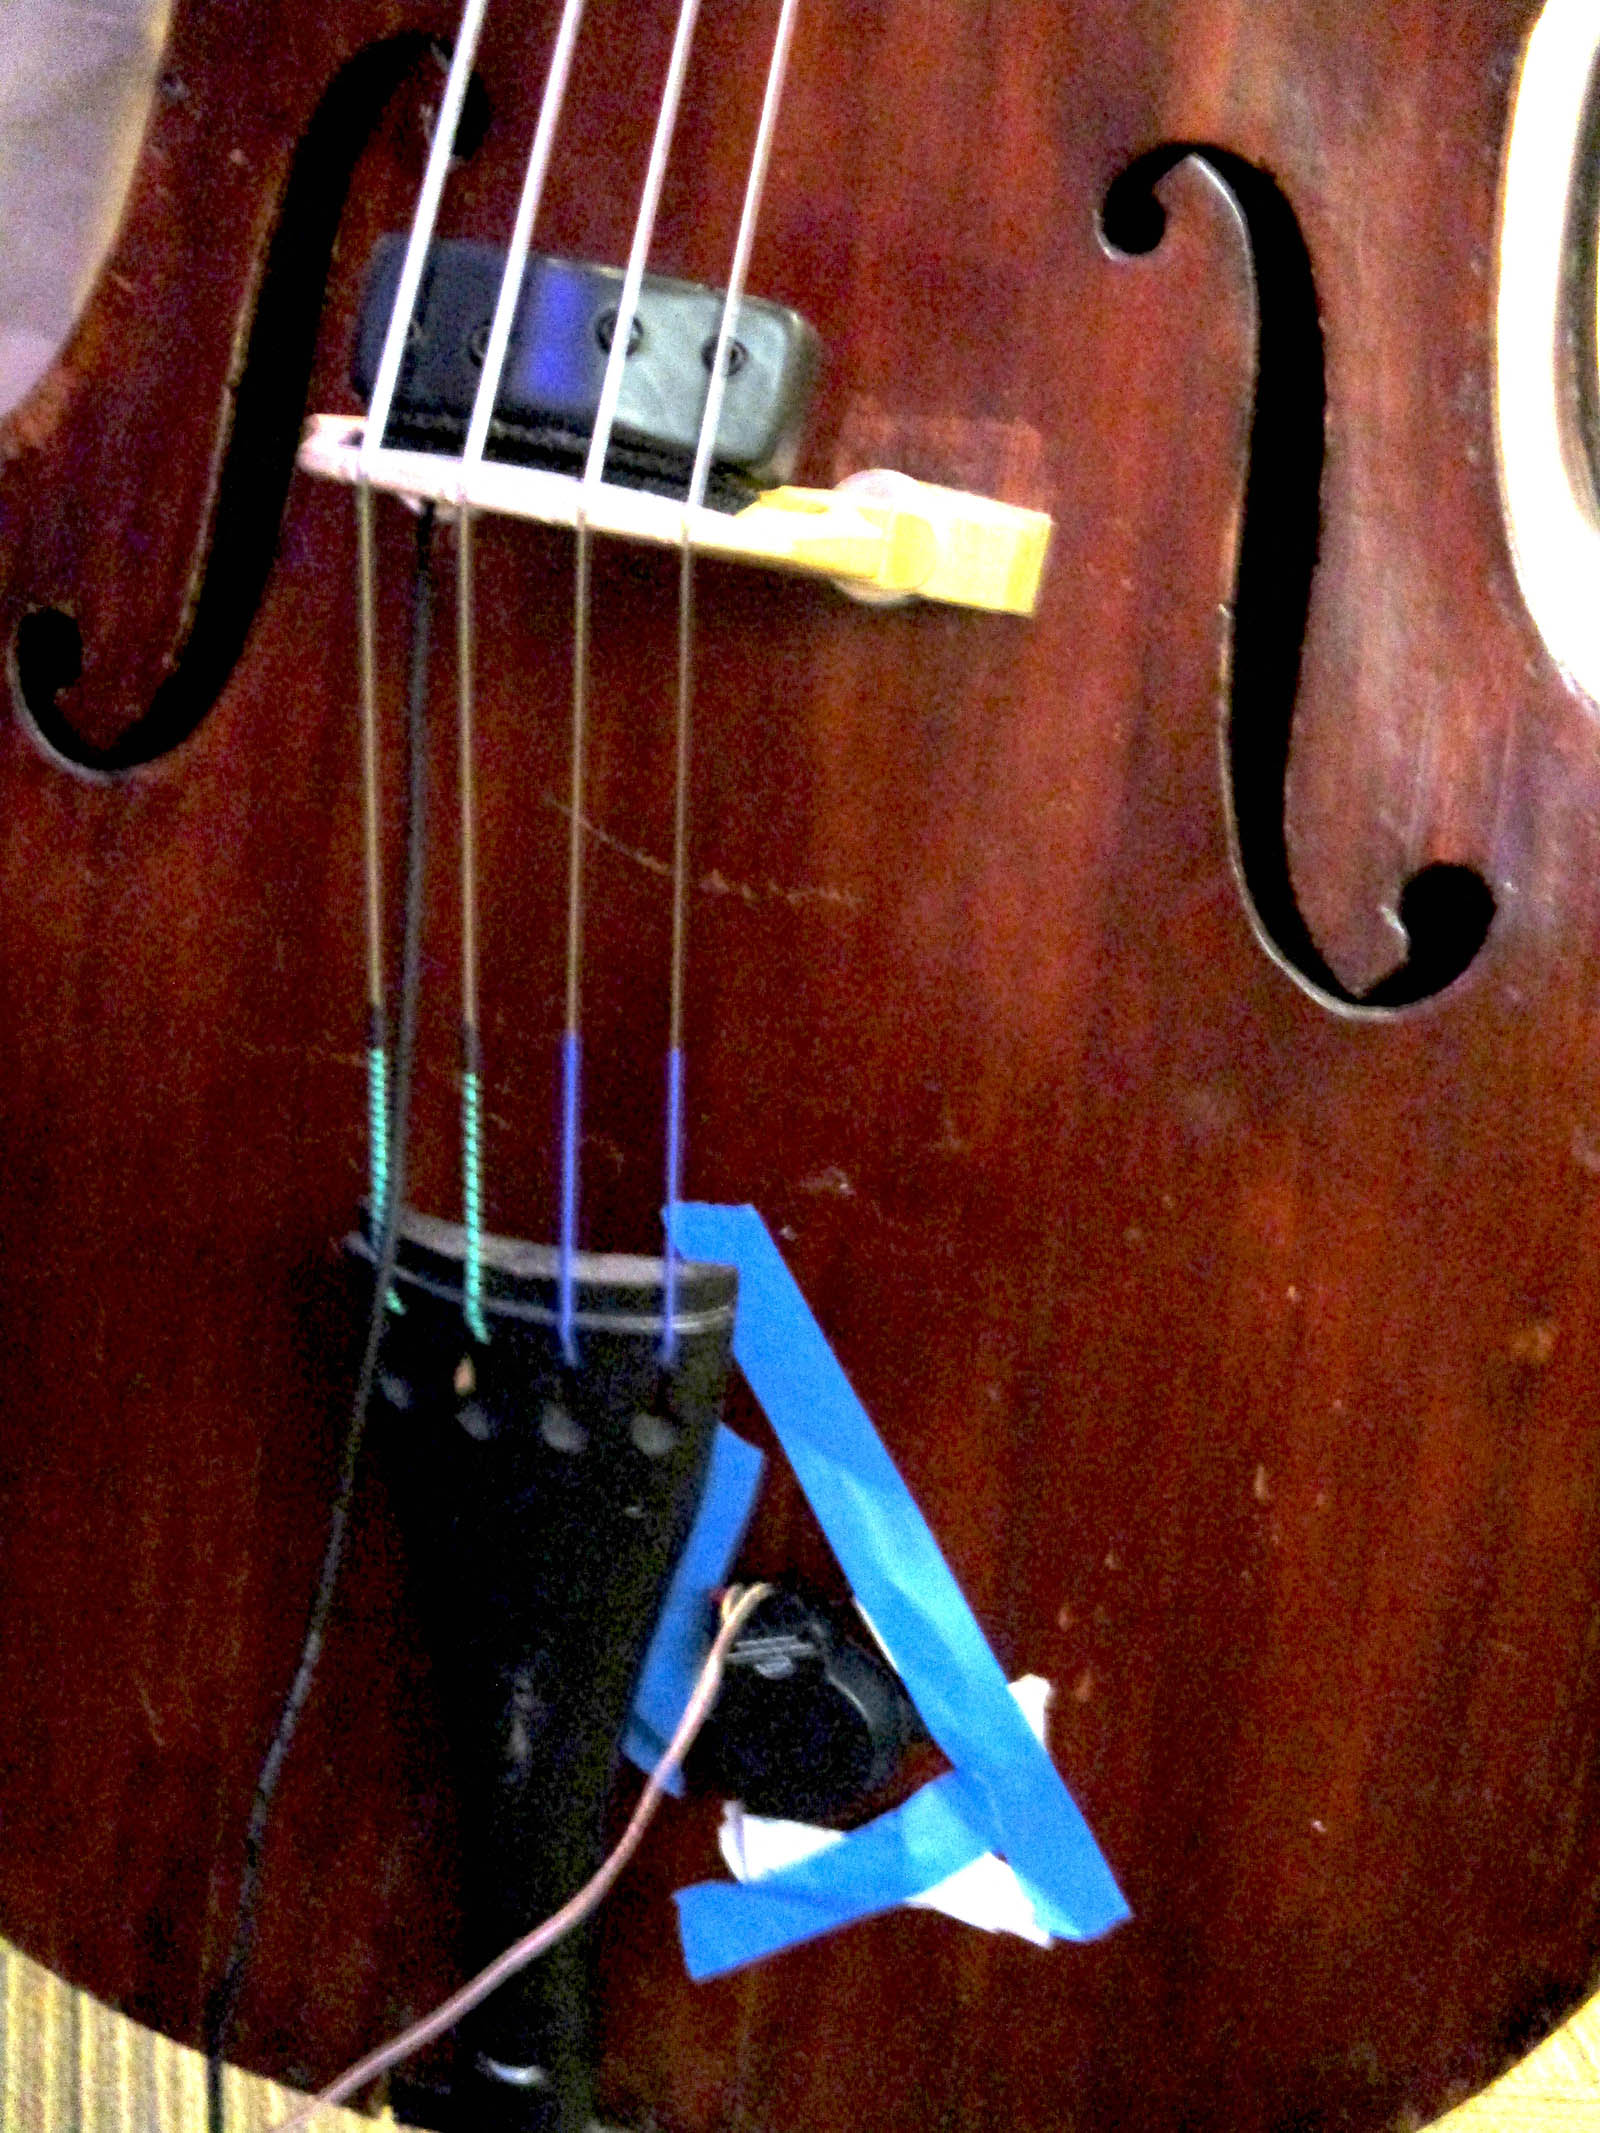 A surface-mounted sensor picking up the vibrations from the cello